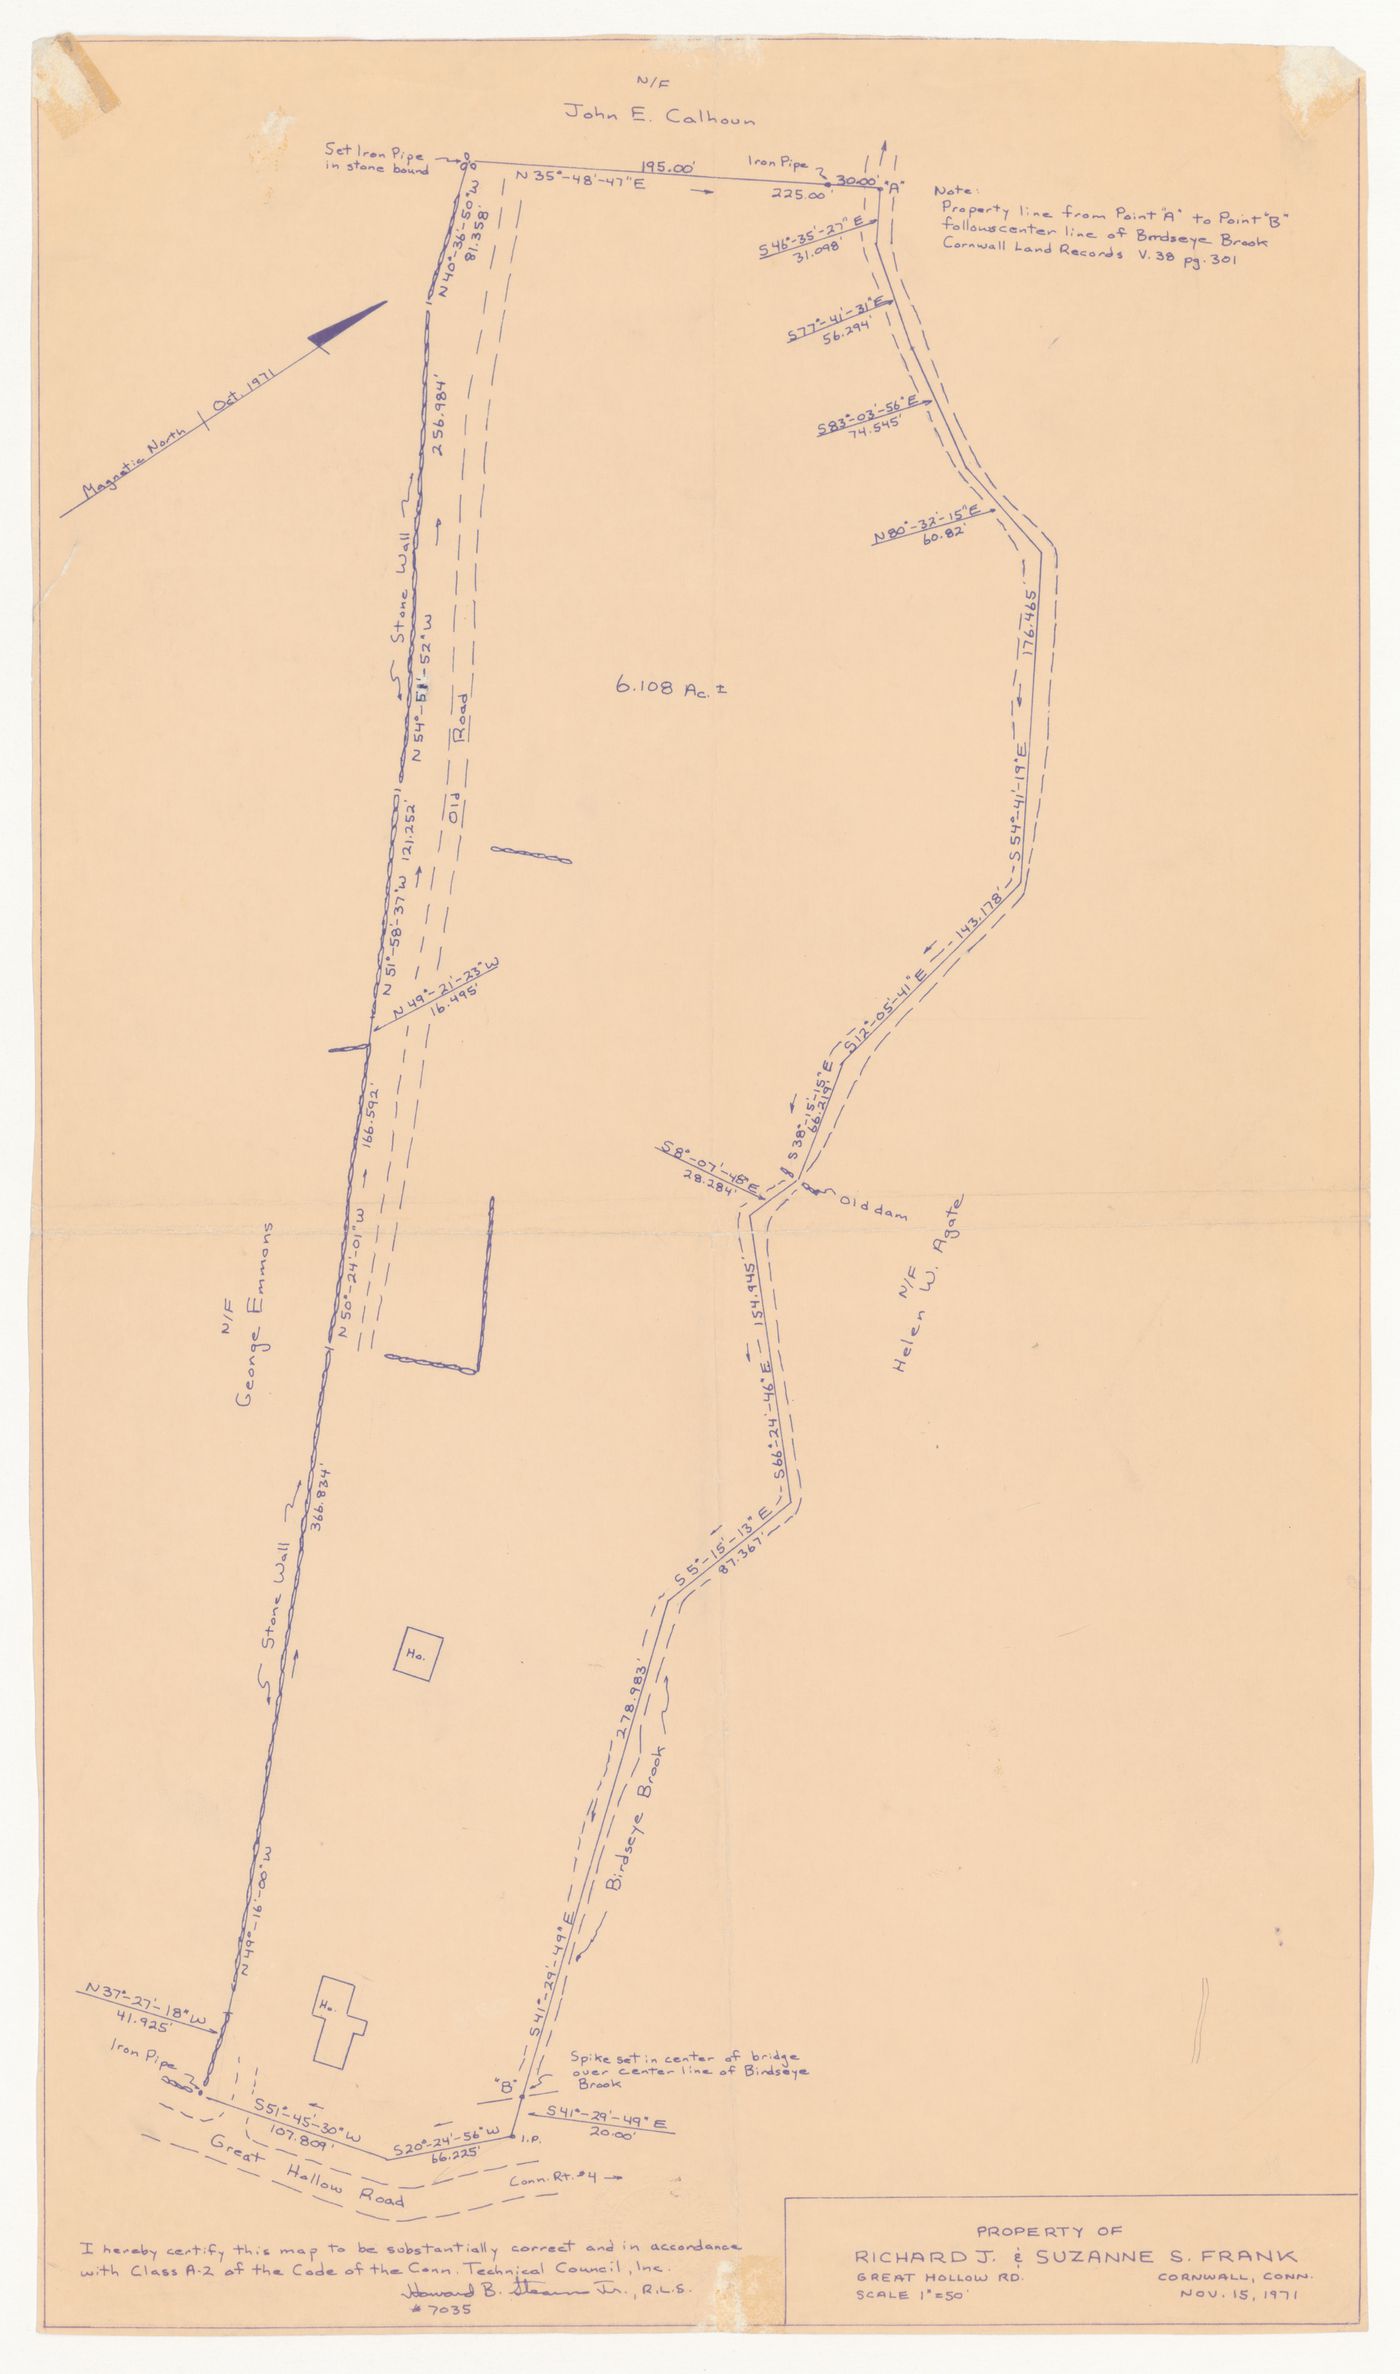 Site map for House VI, Cornwall, Connecticut